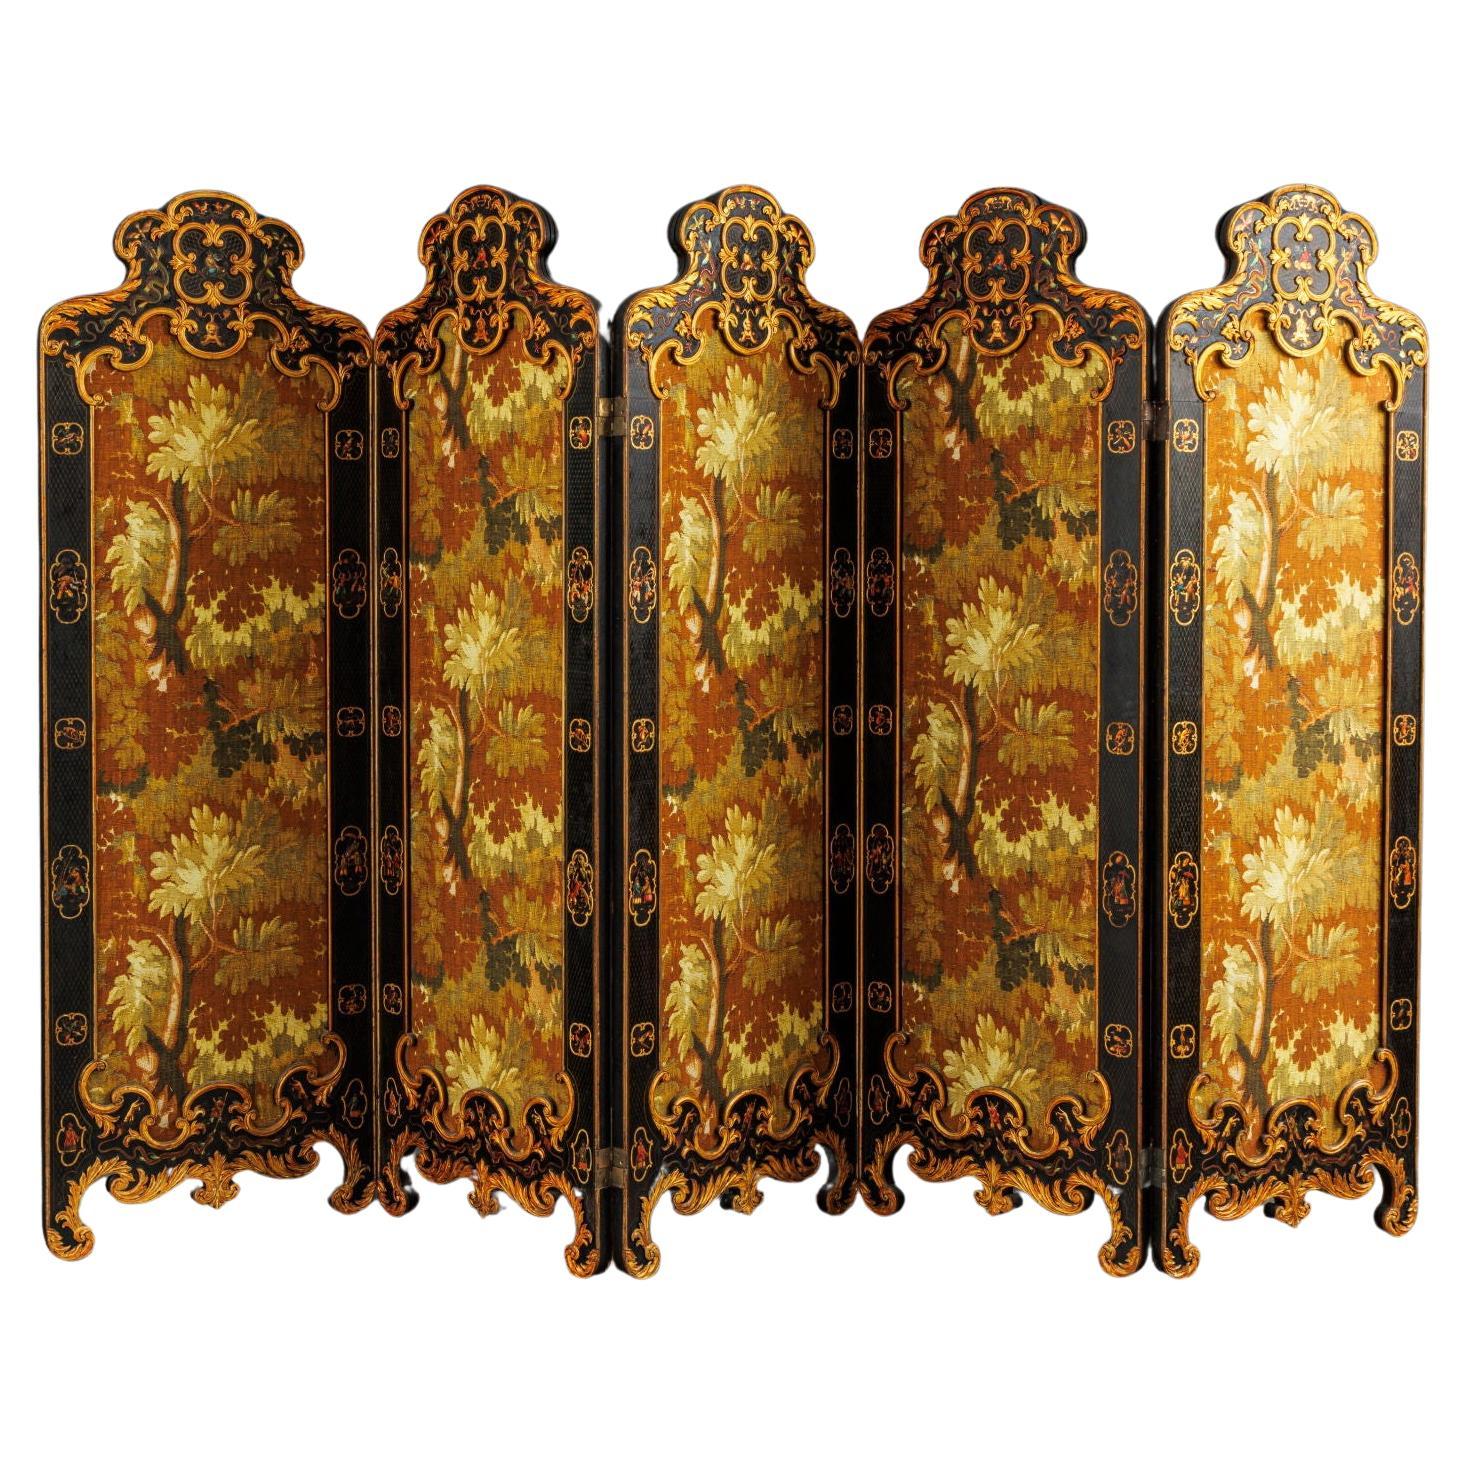 Chinoiserie-style screen. Italy, second quarter 19th century